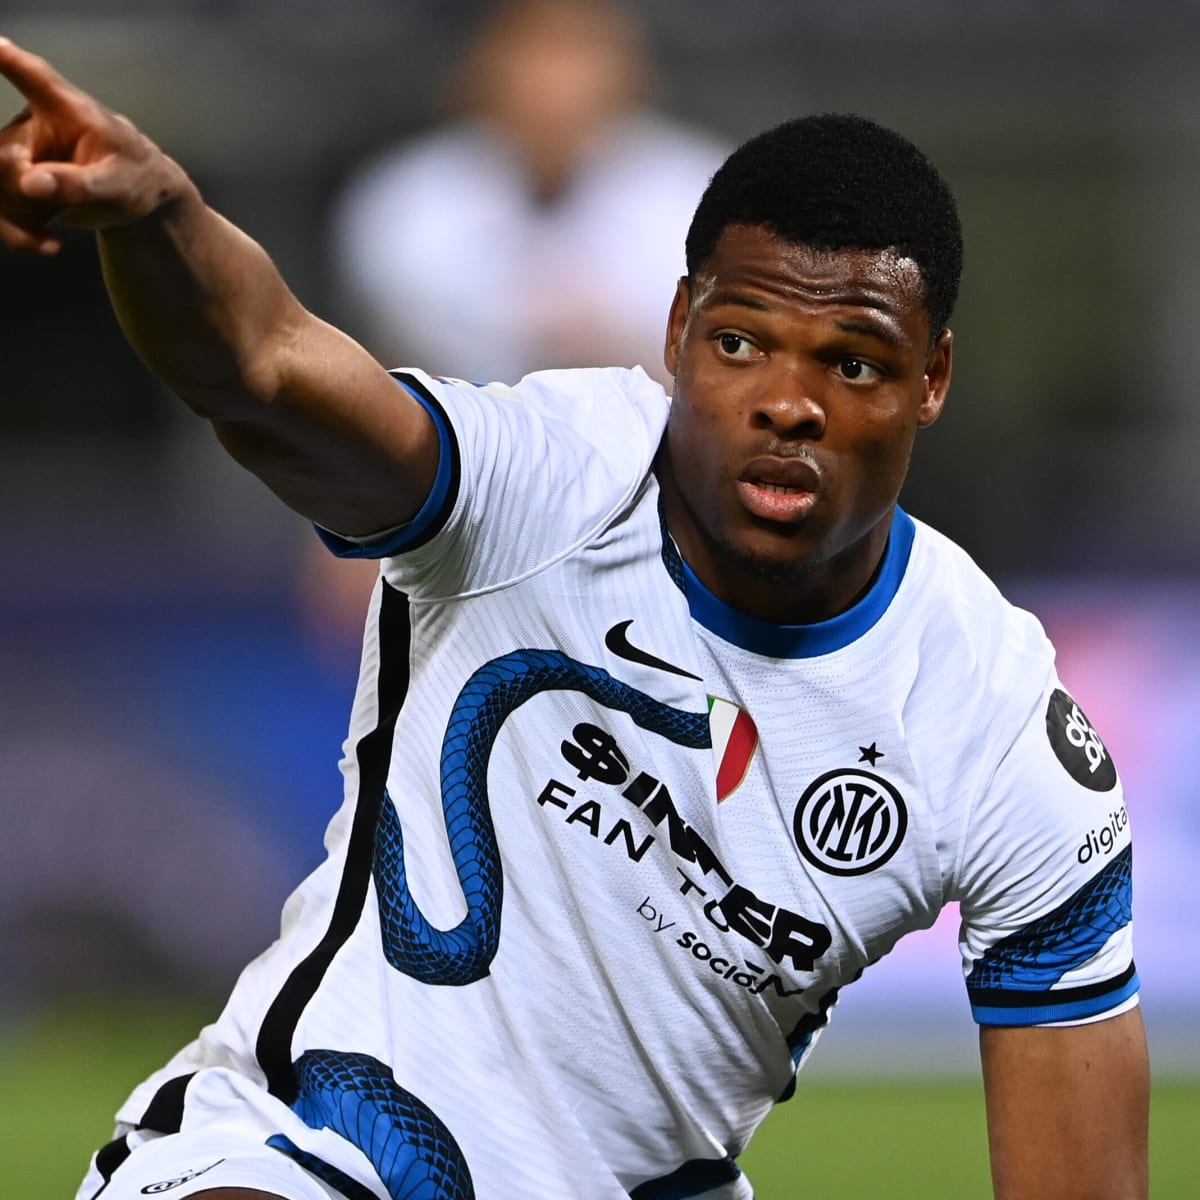 Chelsea transfers: Inter Milan right back Denzel Dumfries to make a SHOCK MOVE to Chelsea in January transfer window - Check Out